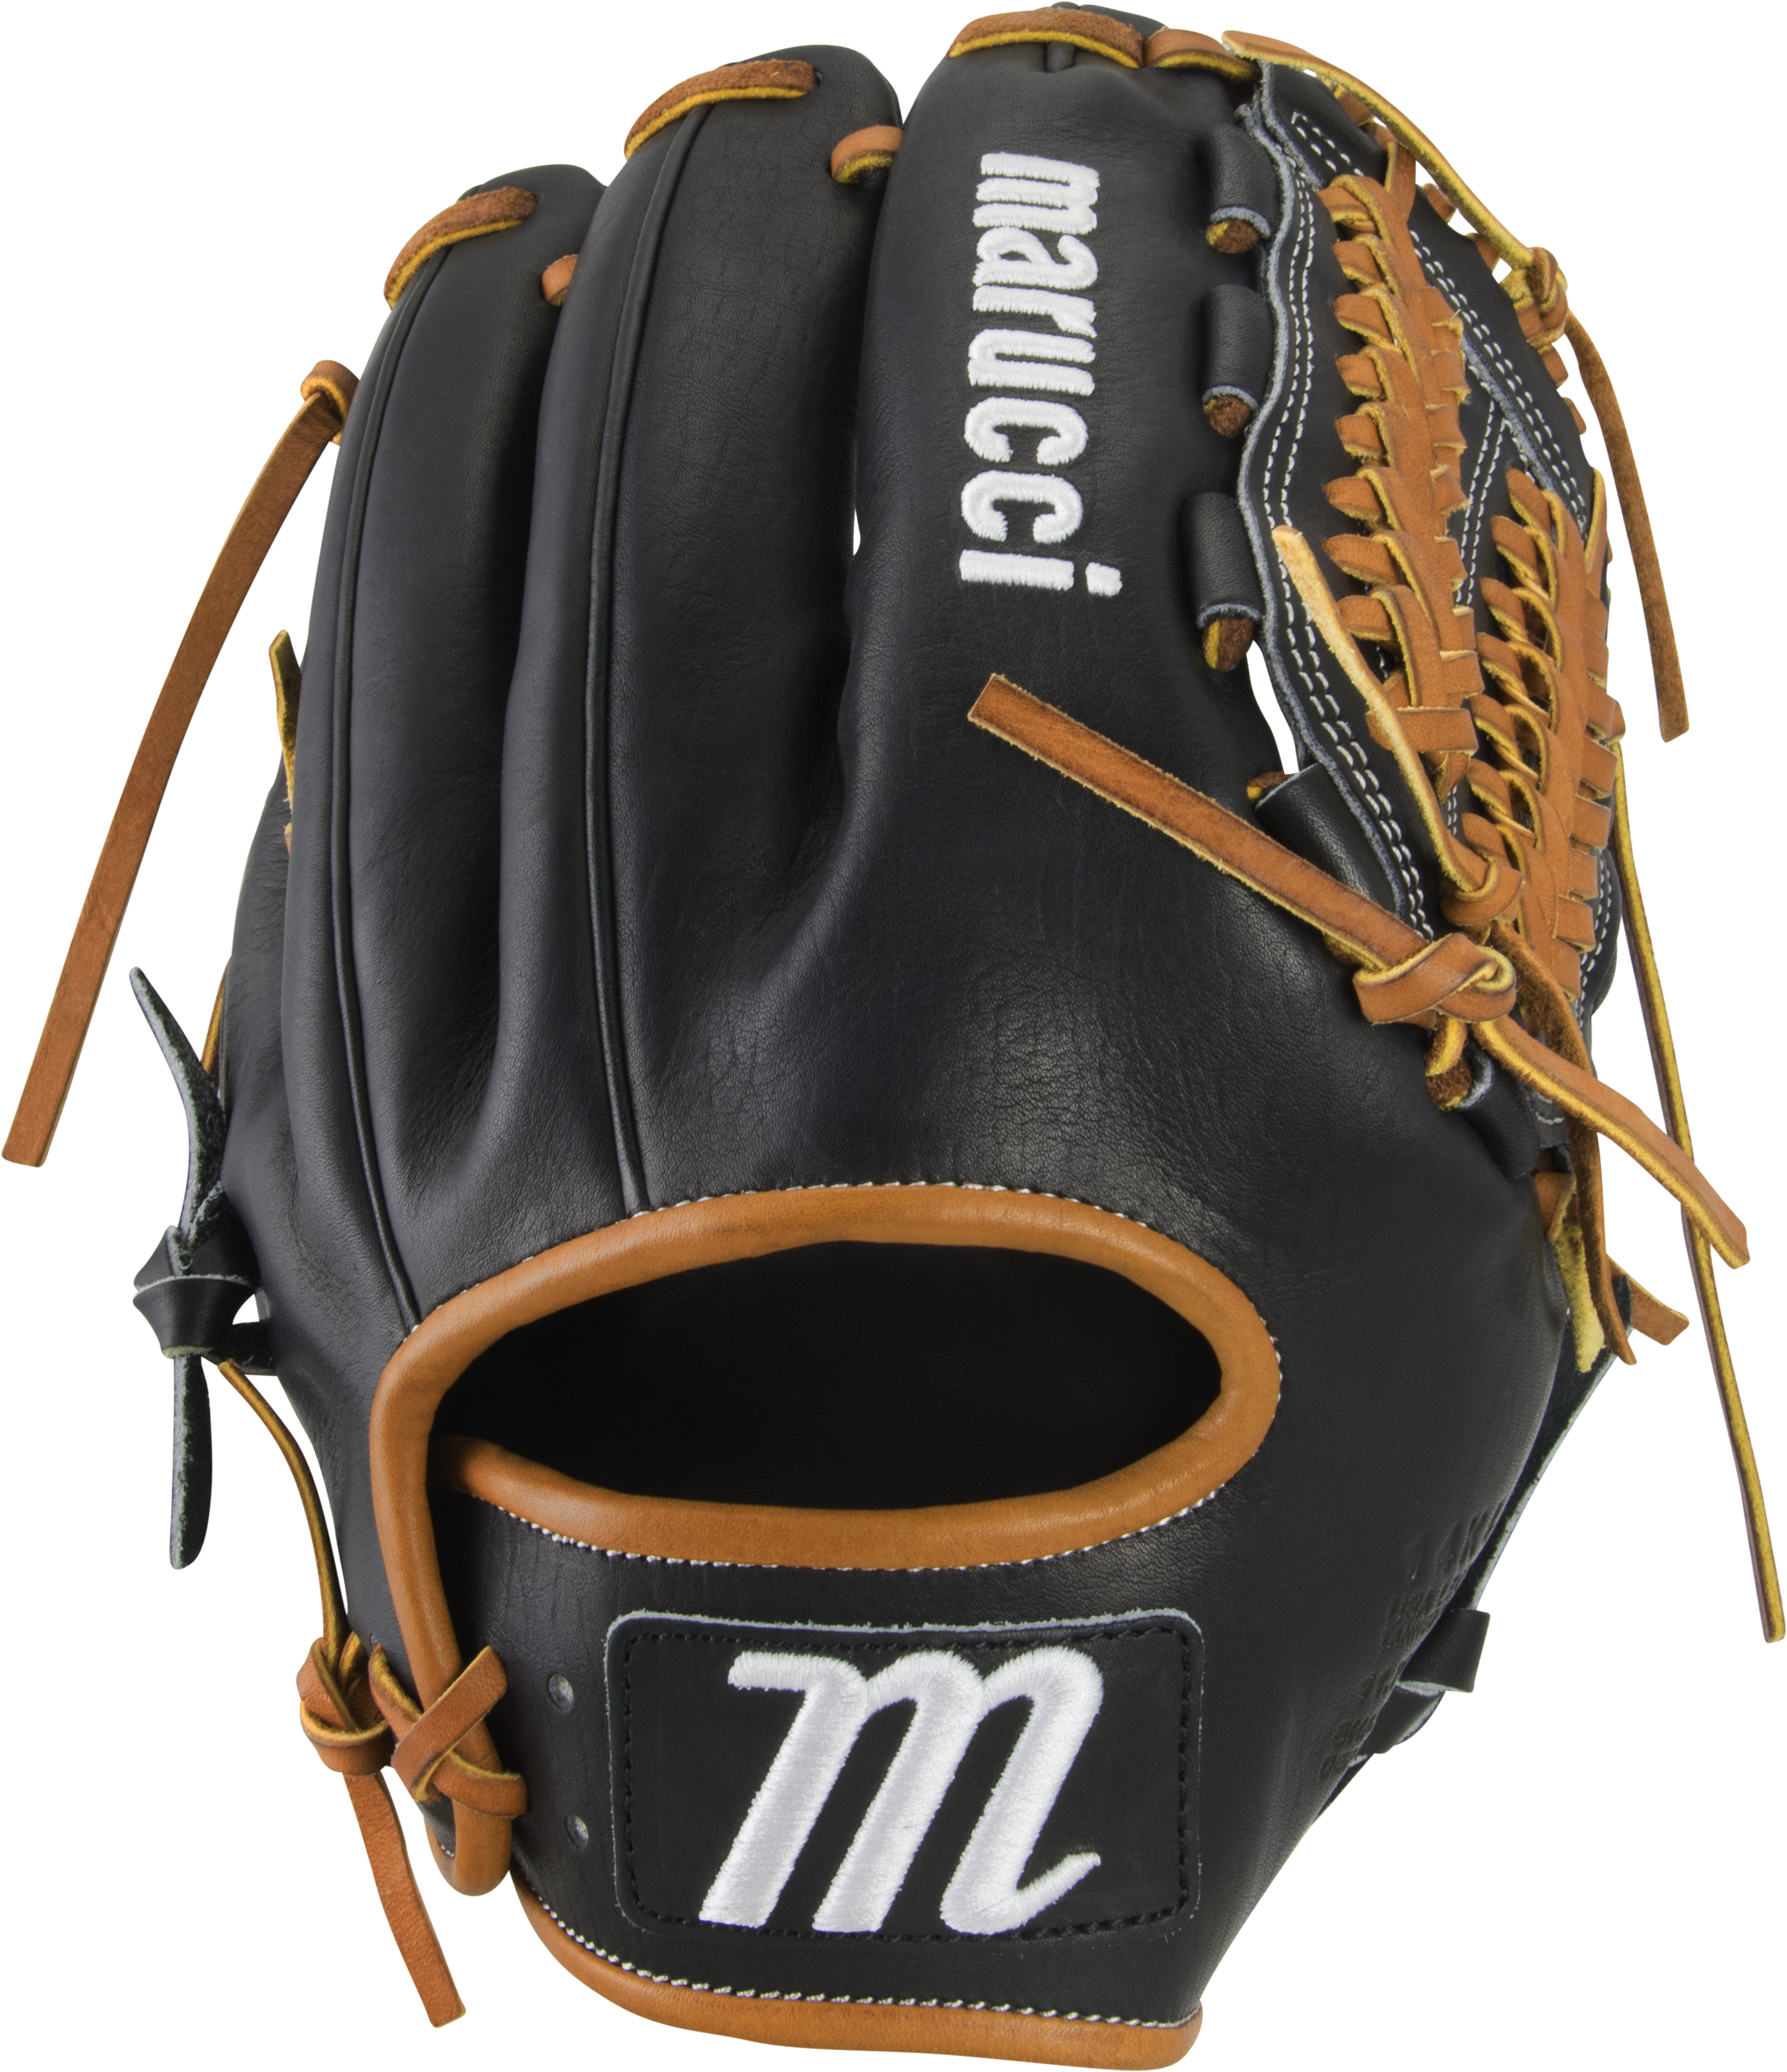 marucci-capitol-11-75-baseball-glove-14k4-single-t-web-right-hand-throw MFGCP14K4-BKTF-RightHandThrow Marucci  849817099230 Premium Japanese-tanned USA Kip leather combines ideal stiffness with lightweight feel